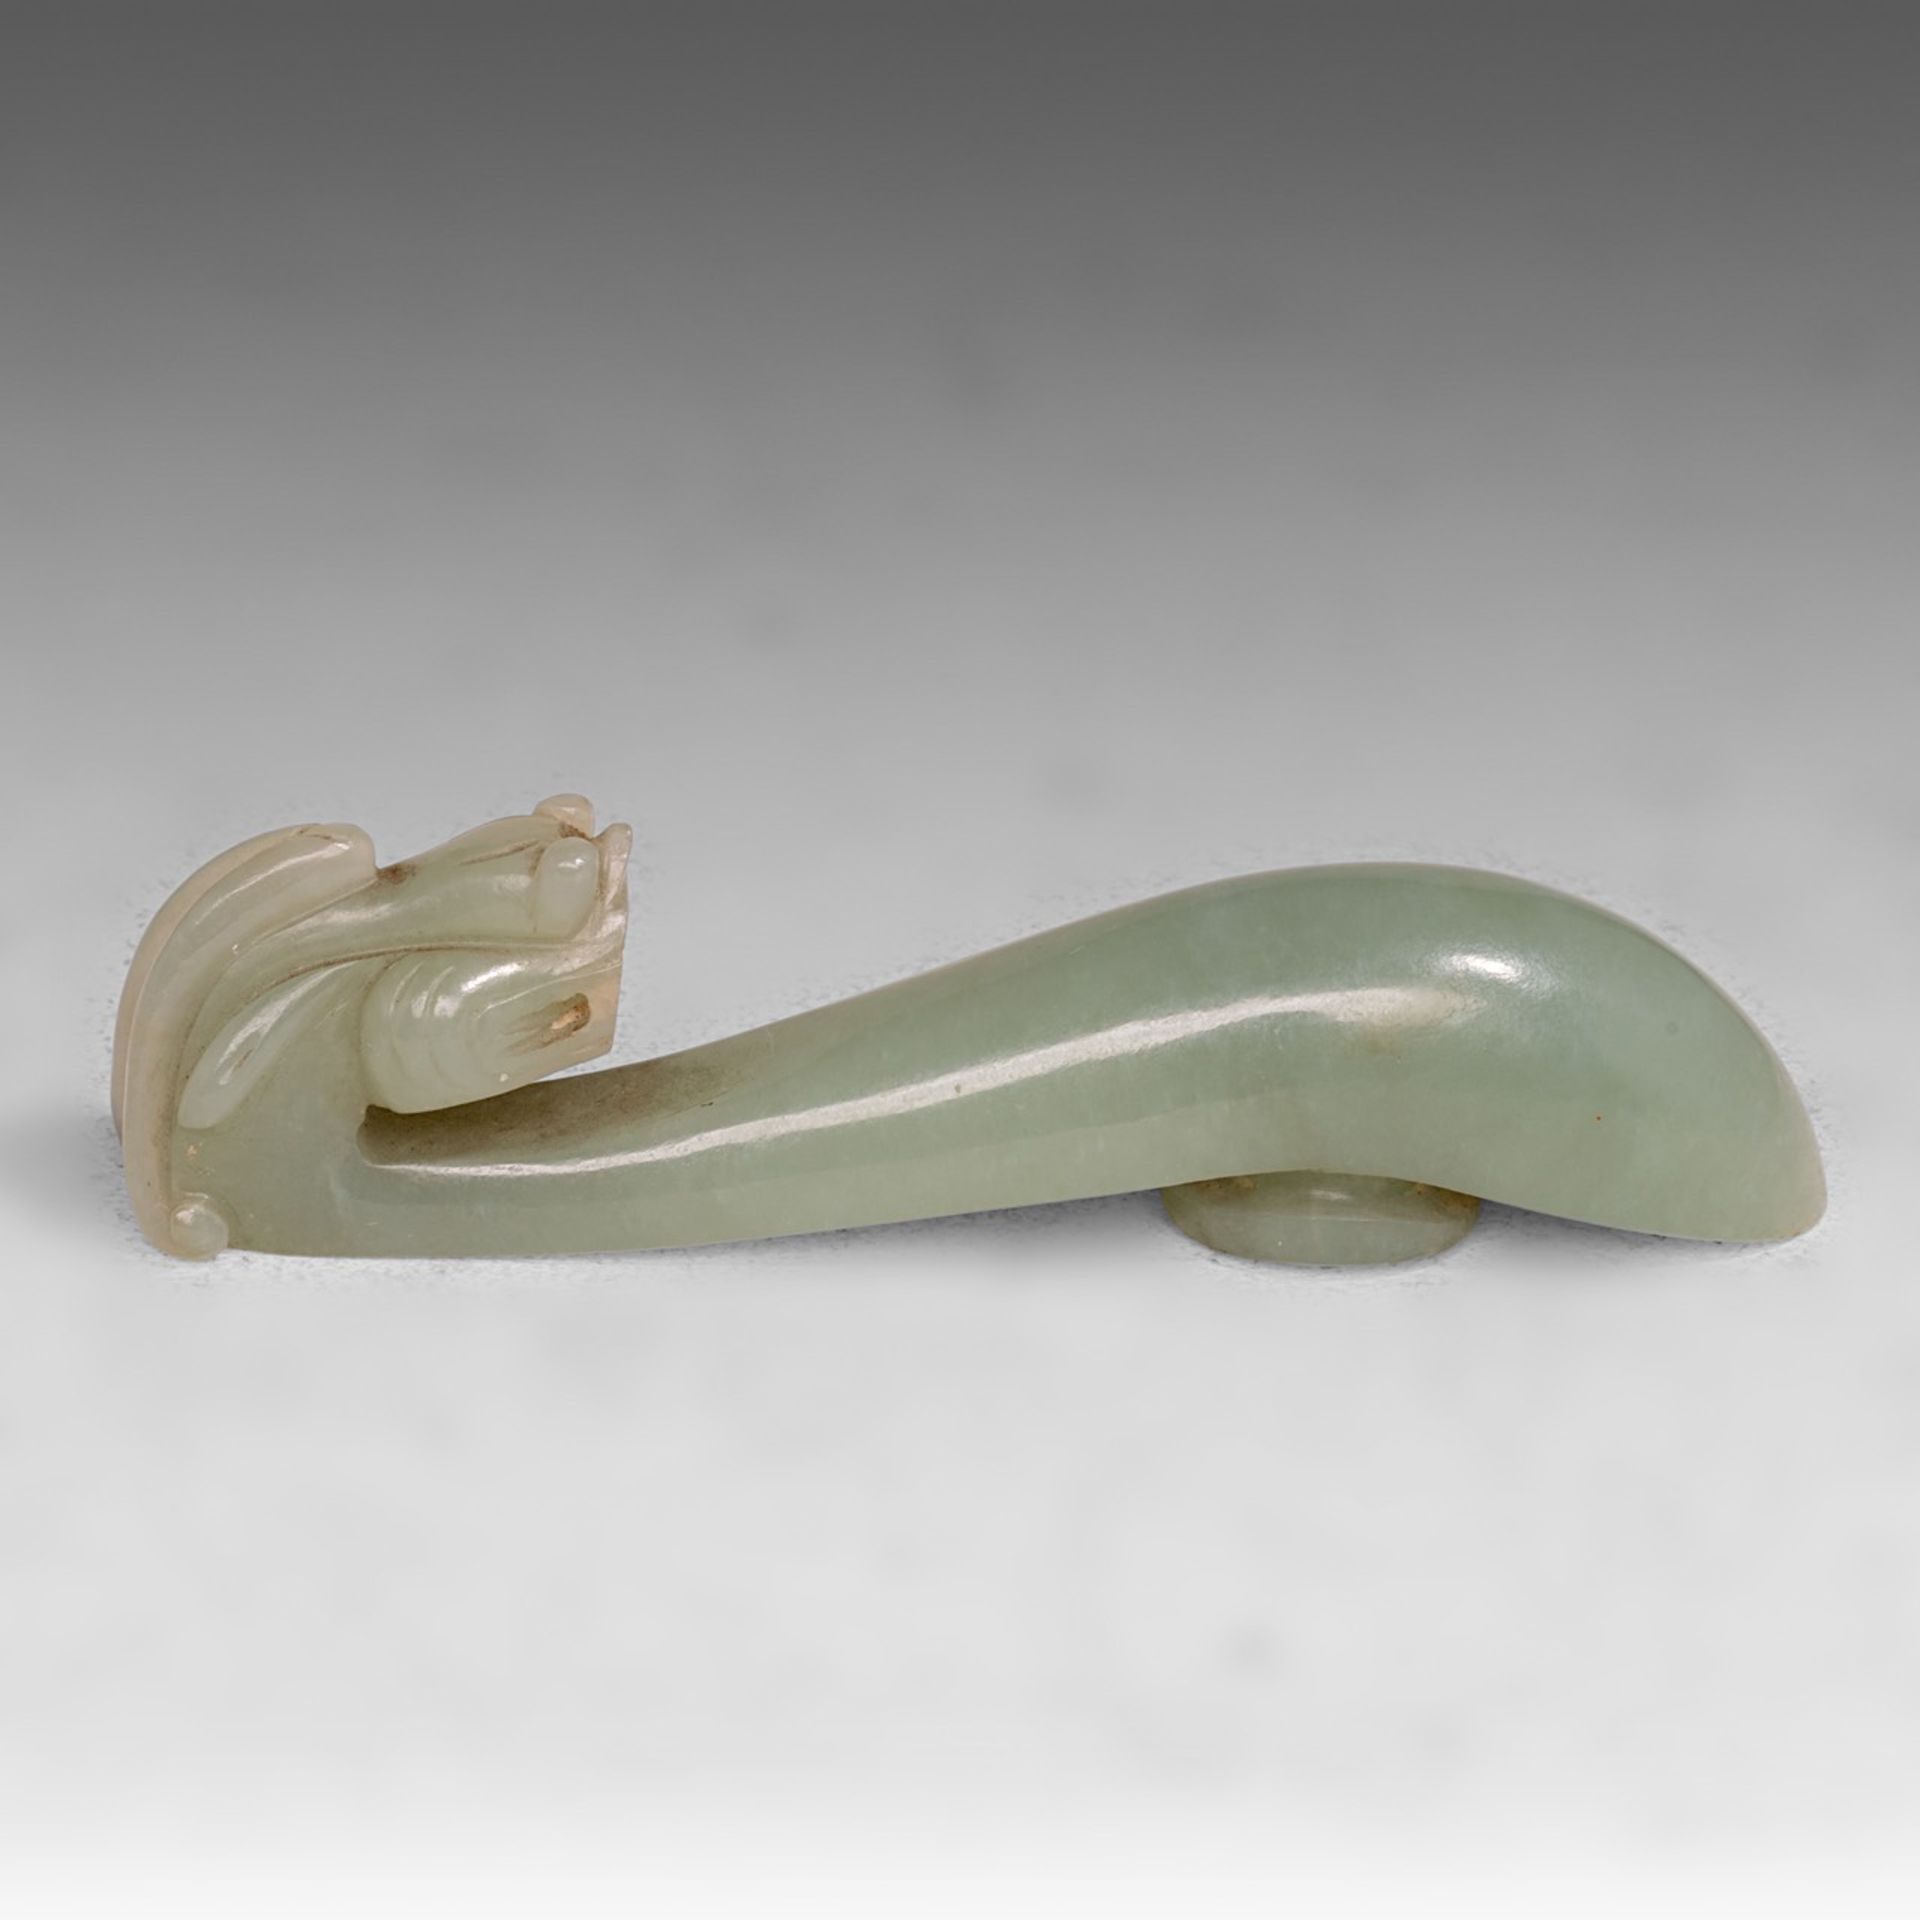 A fine Chinese archaistic style jade belt buckle, Qing dynasty, L 8,5 cm - Image 3 of 5